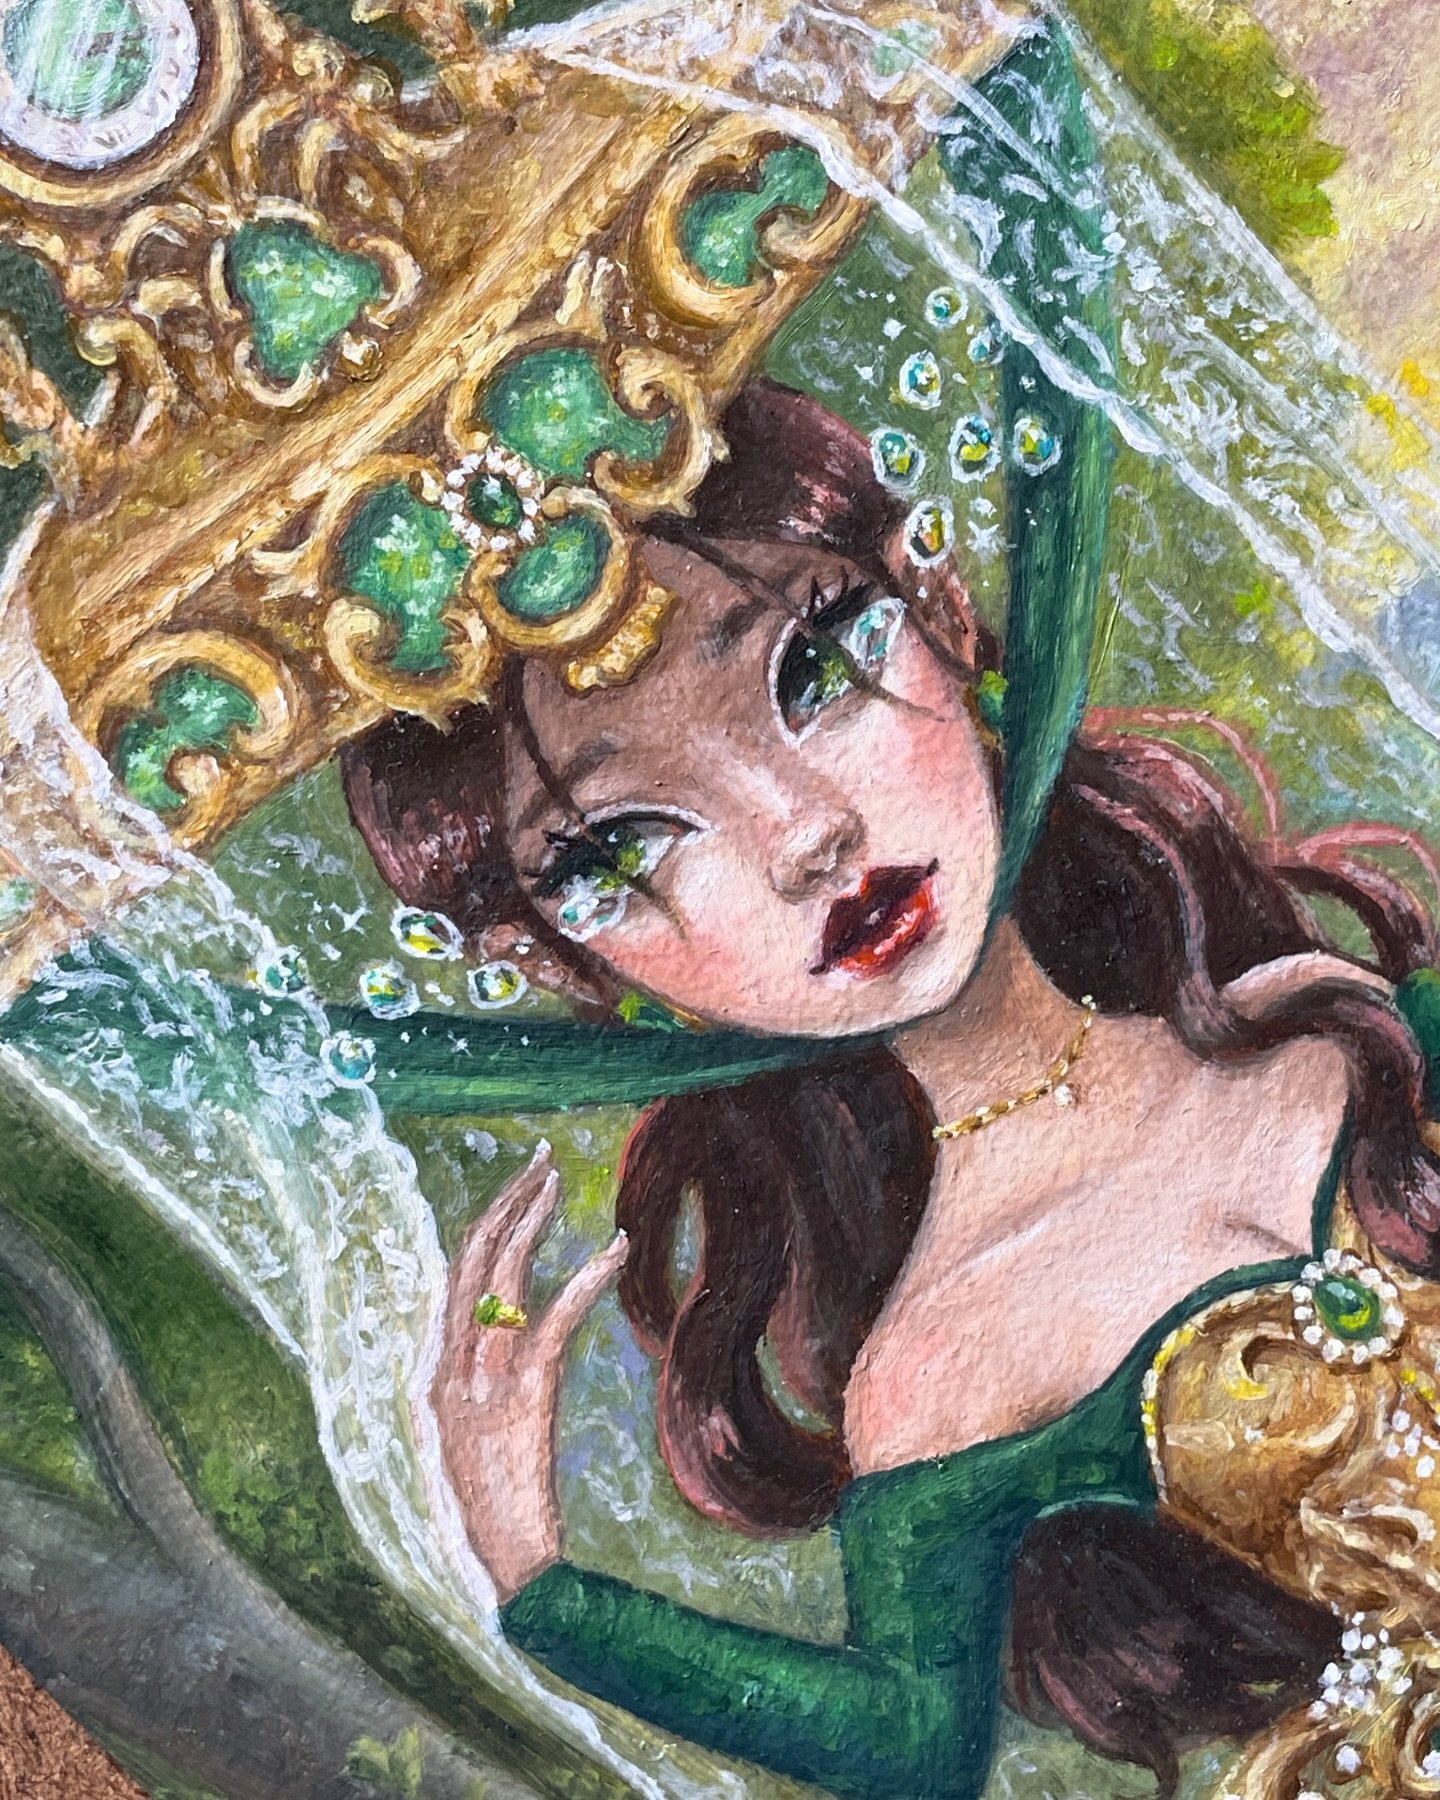 ✨ Sneak peek of my painting for @wowxwow_art upcoming MicroVisions 7 show. Opening May 3rd.

#beautifulbizarre #oilpainting #oilportrait #wowxwow_art #microvisions7